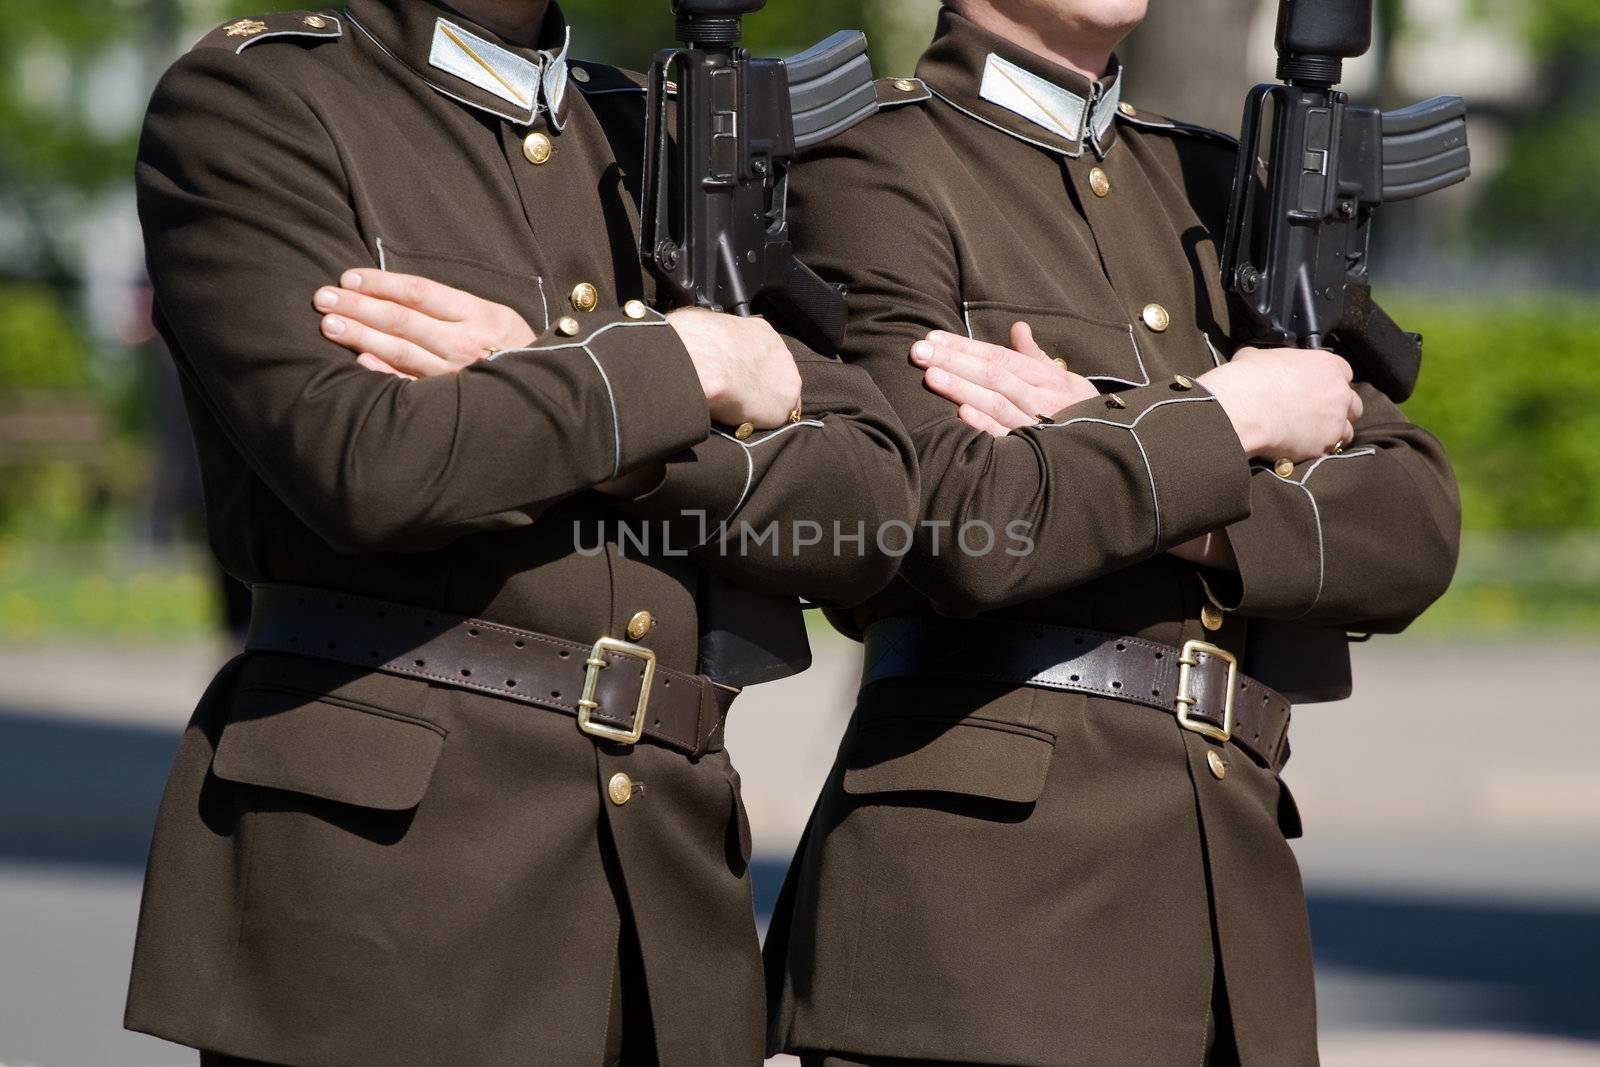 Two latvian honor guards with rifles marching